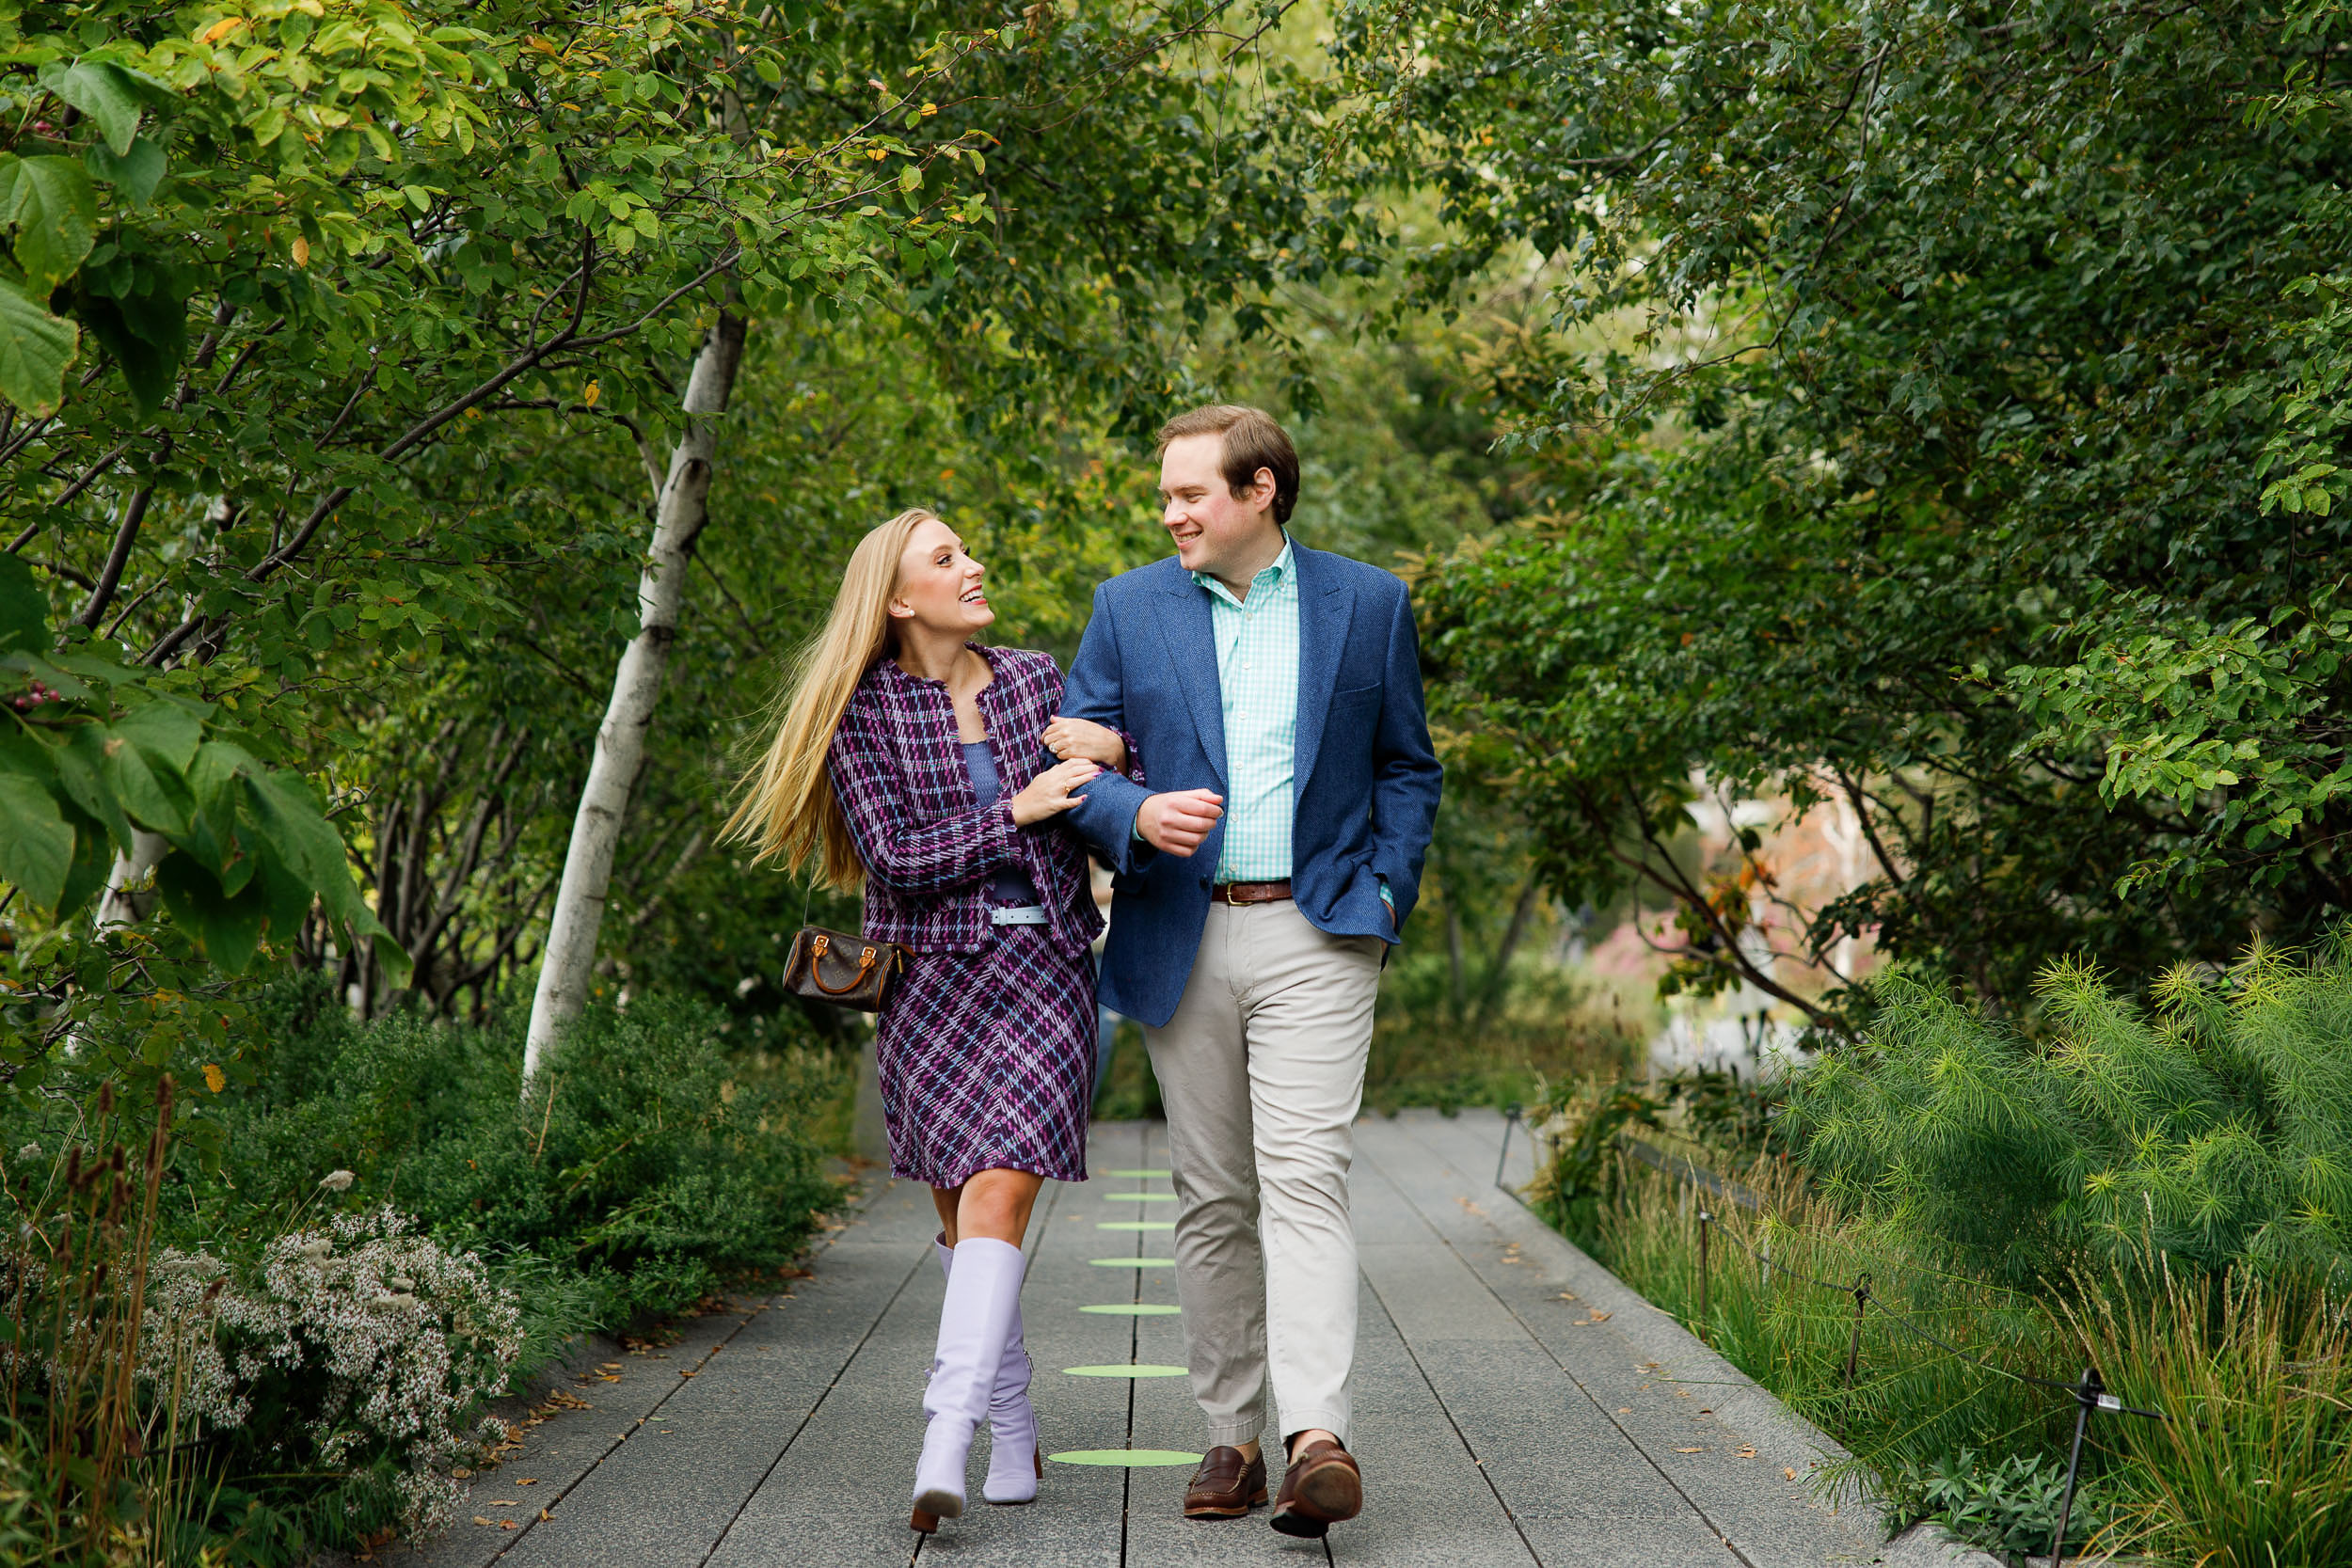 NYC Highline Engagement Session